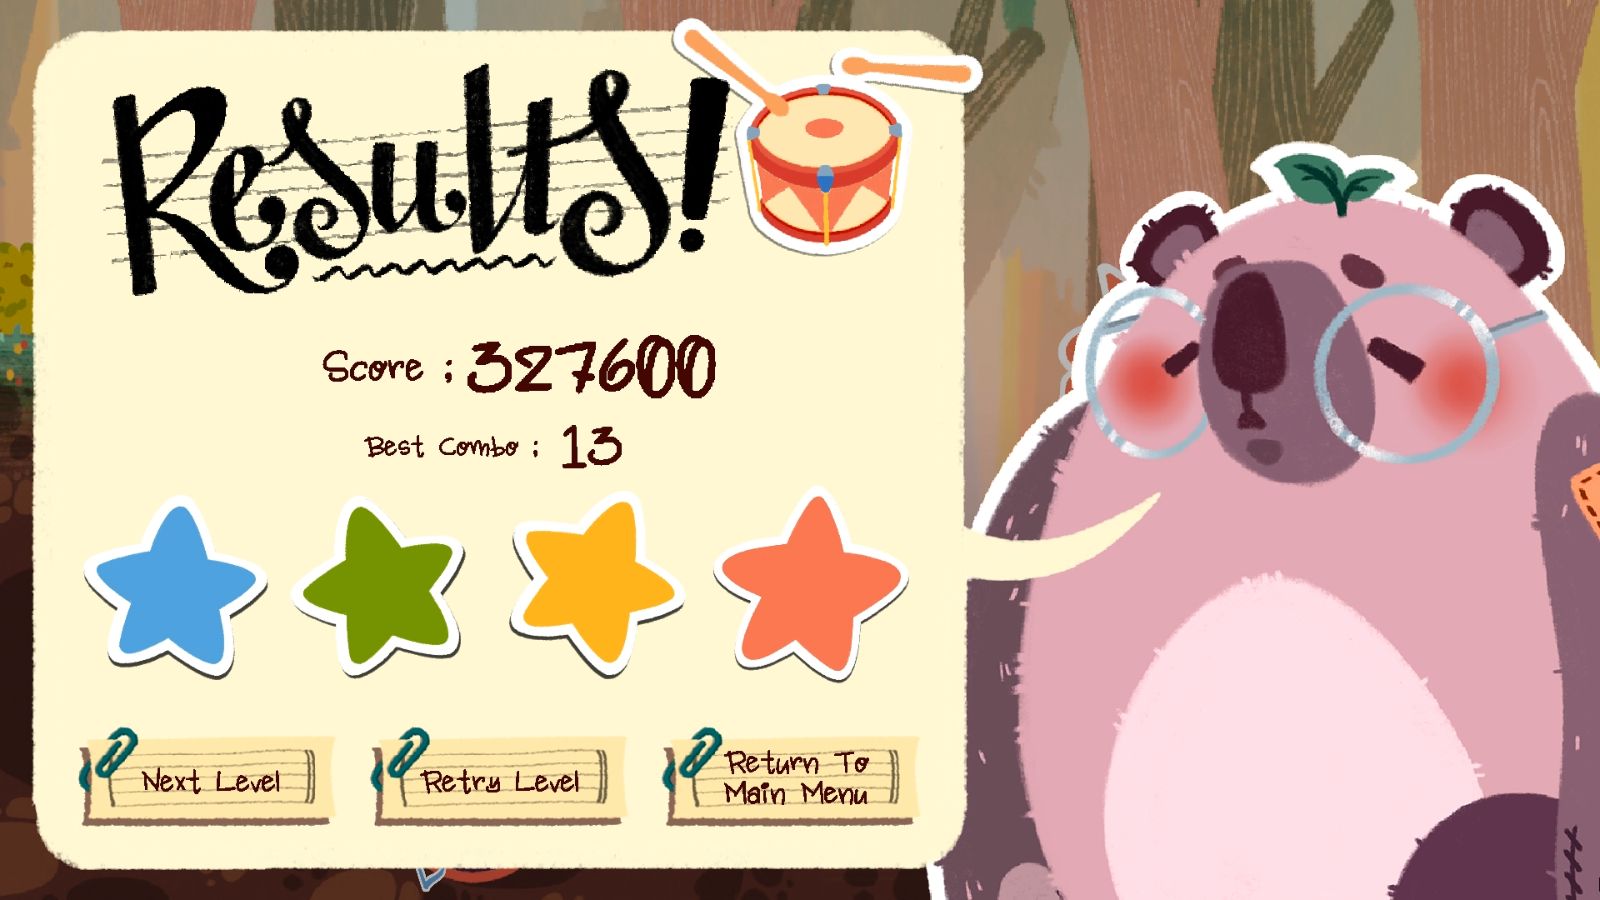 A results screen with a player score is shown at the end of a level.